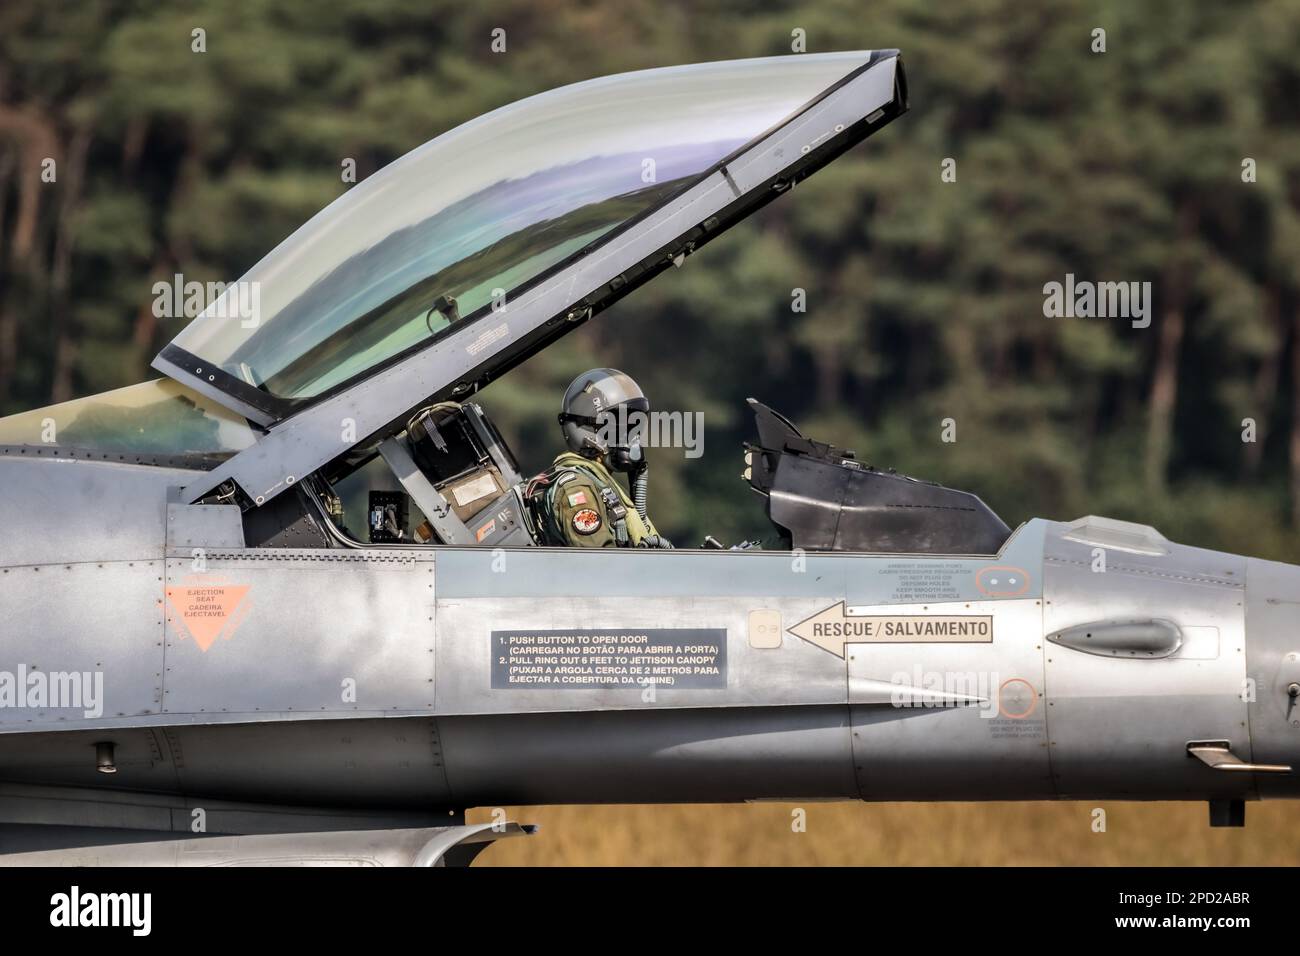 Portuguese military pilot with it's helmet on in the cockpit of a F-16 fighter jet at Kleine Brogel Airbase. Belgium - September 13, 2021 Stock Photo